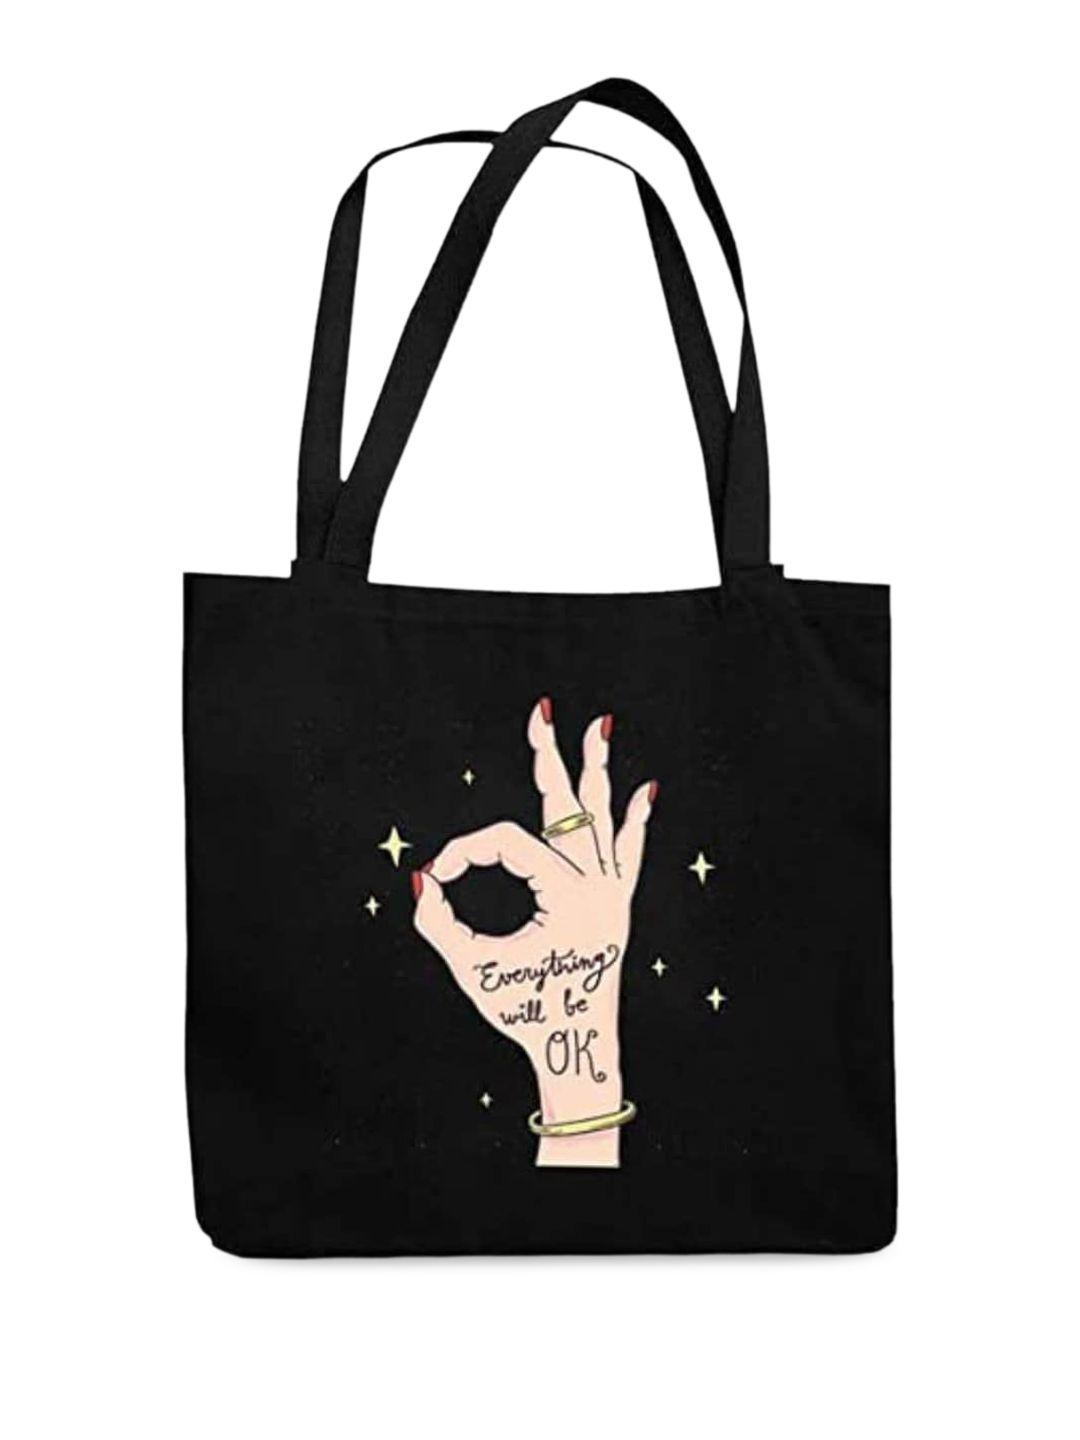 theyayacafe graphic printed structured tote bag with applique